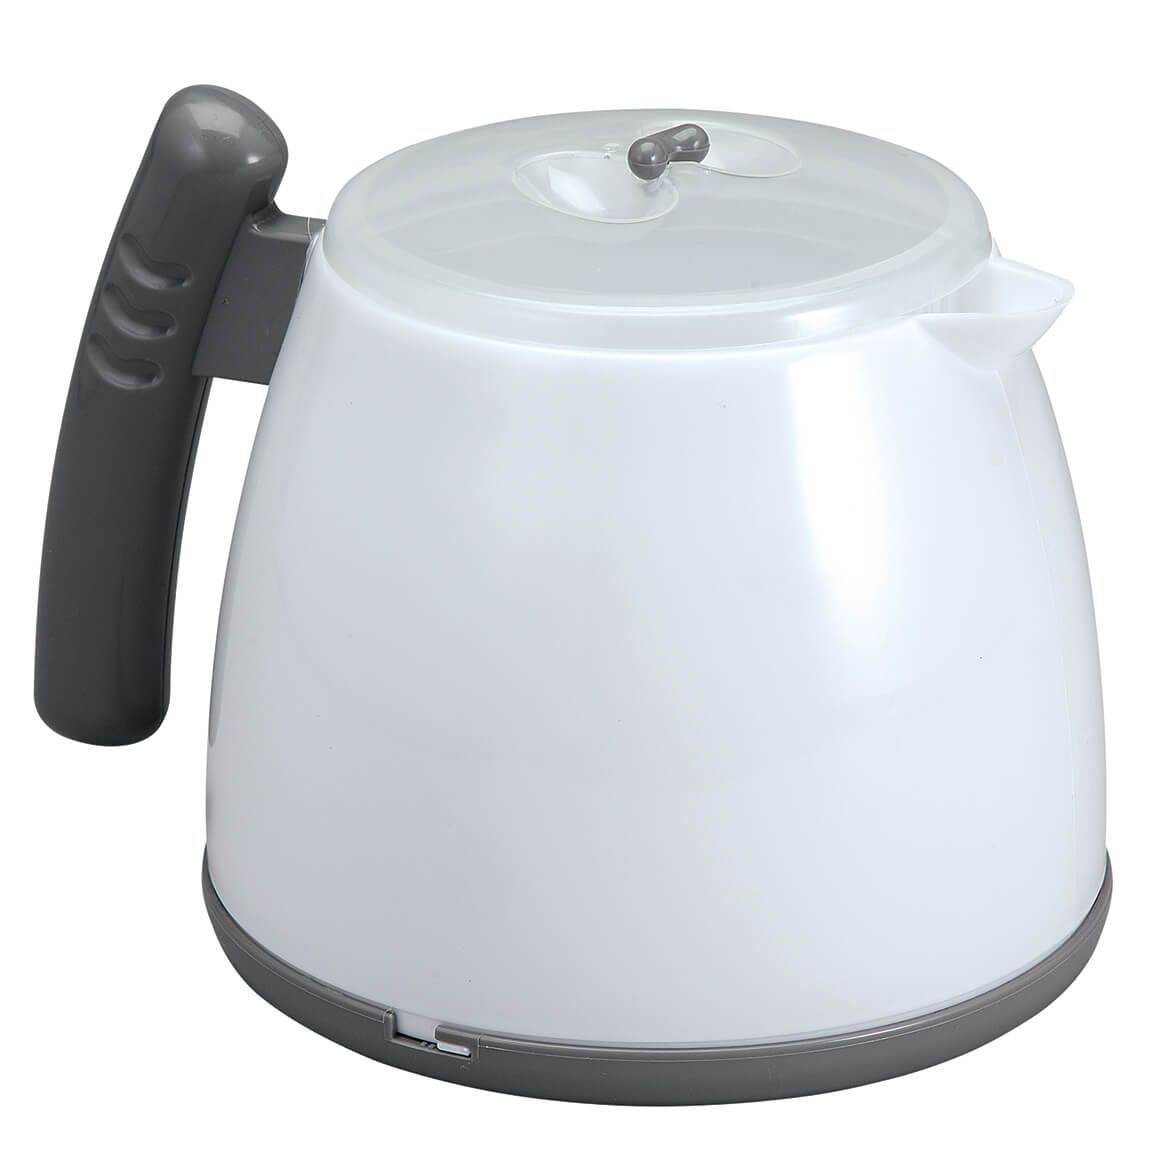 Microwave Tea Kettle by Home Marketplace + '-' + 371631